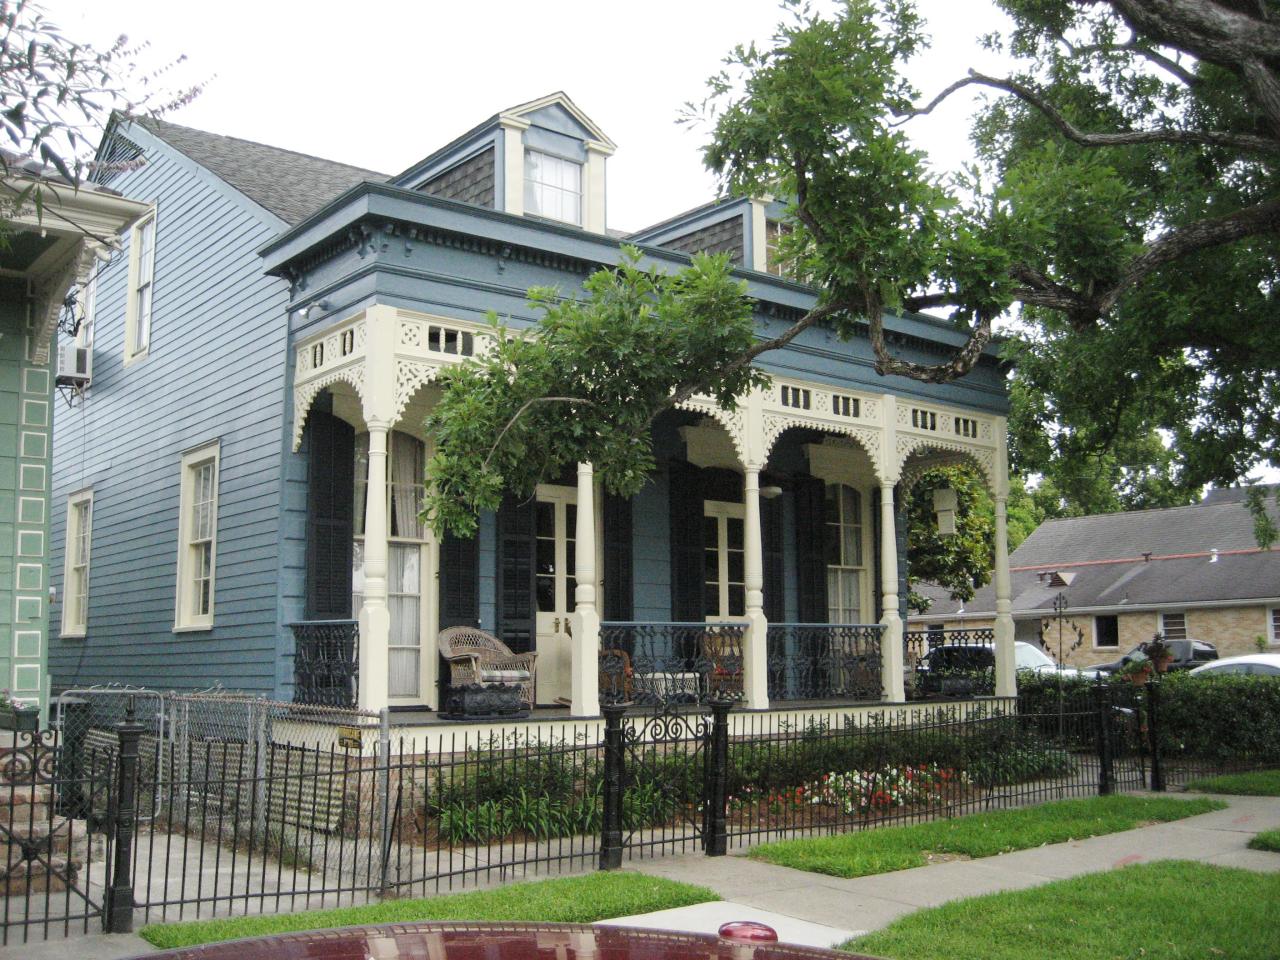 New Orleans-Style Homes | Interior Design Styles and Color Schemes for